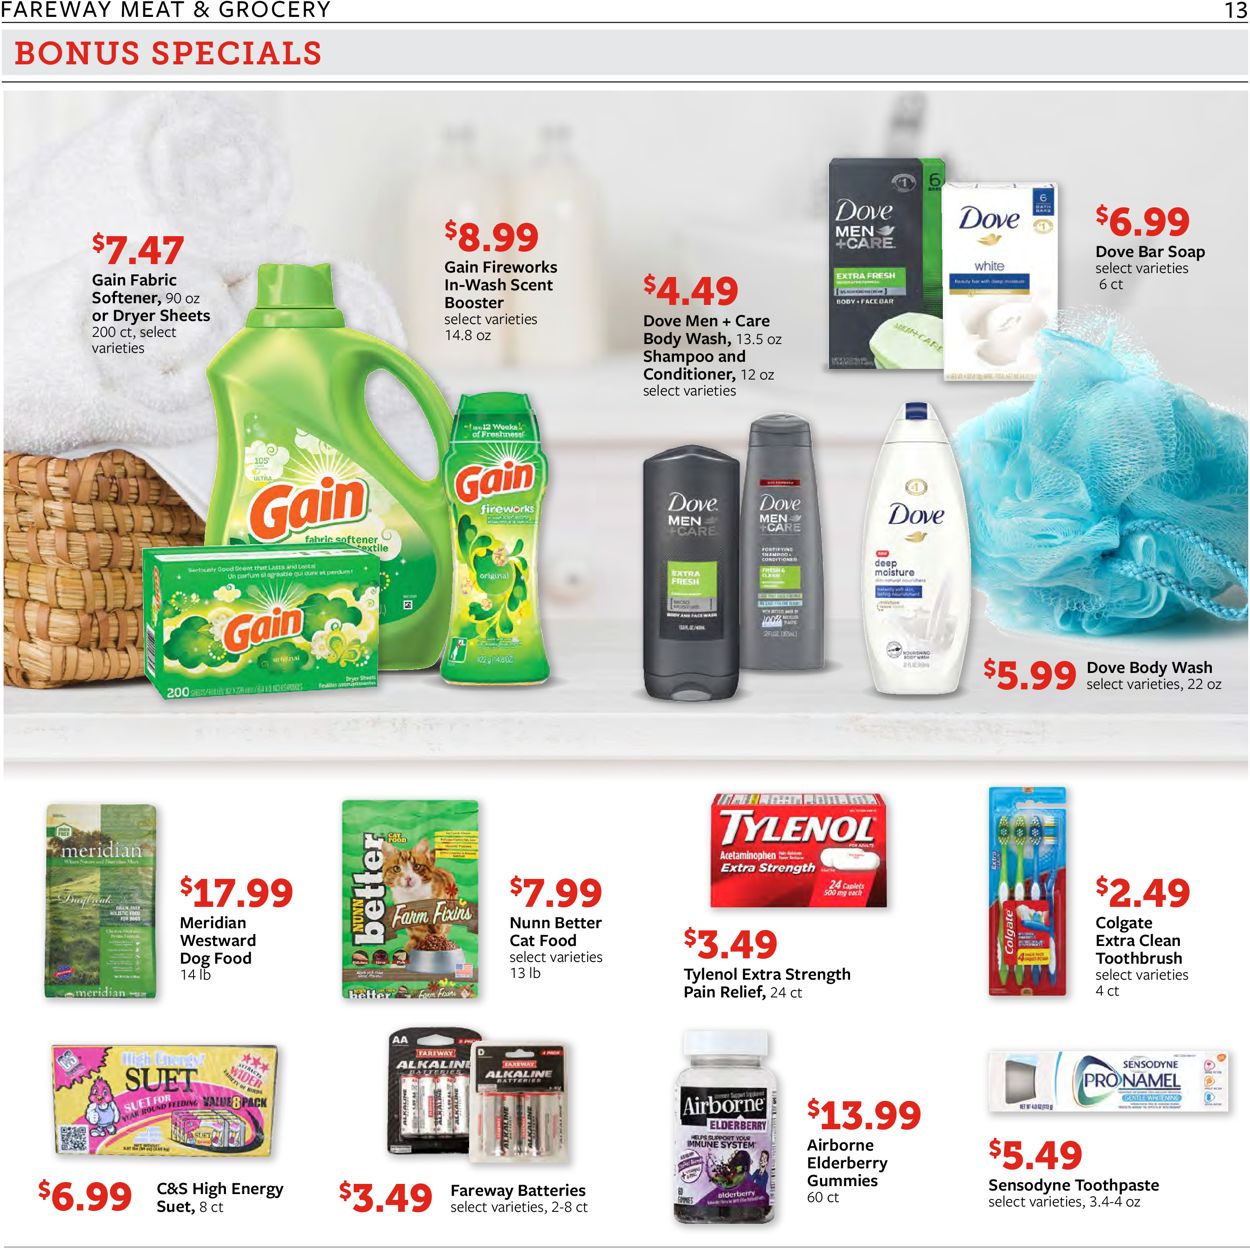 Catalogue Fareway - Easter 2021 from 03/30/2021